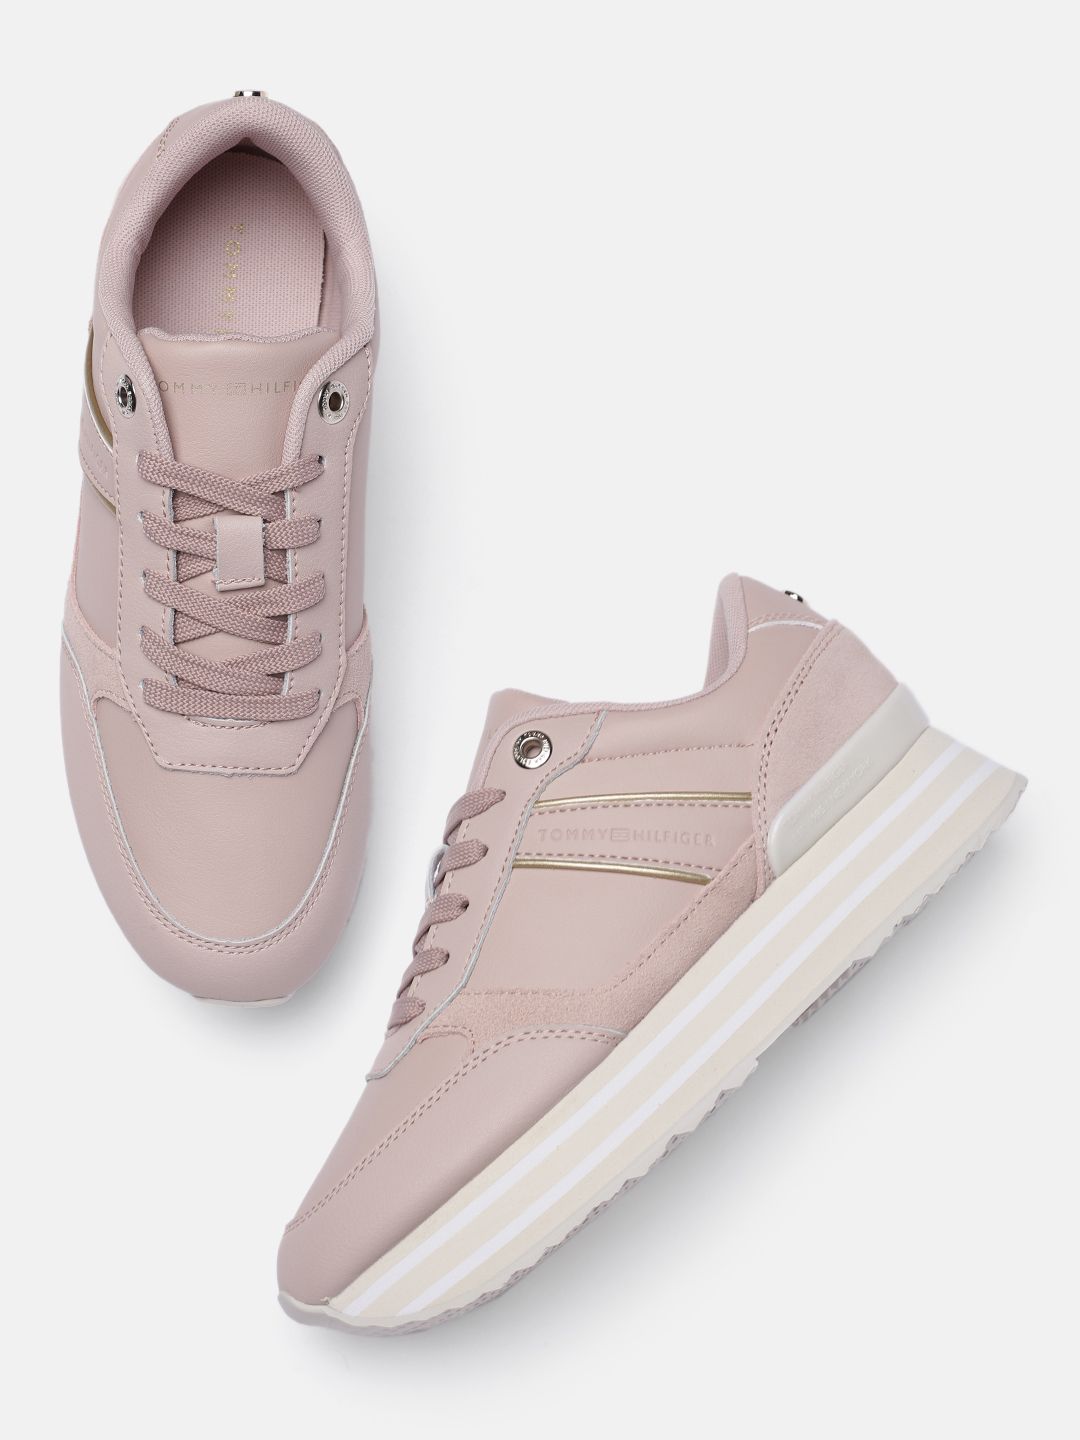 Tommy Hilfiger Women Pink Leather Sneakers Price in India